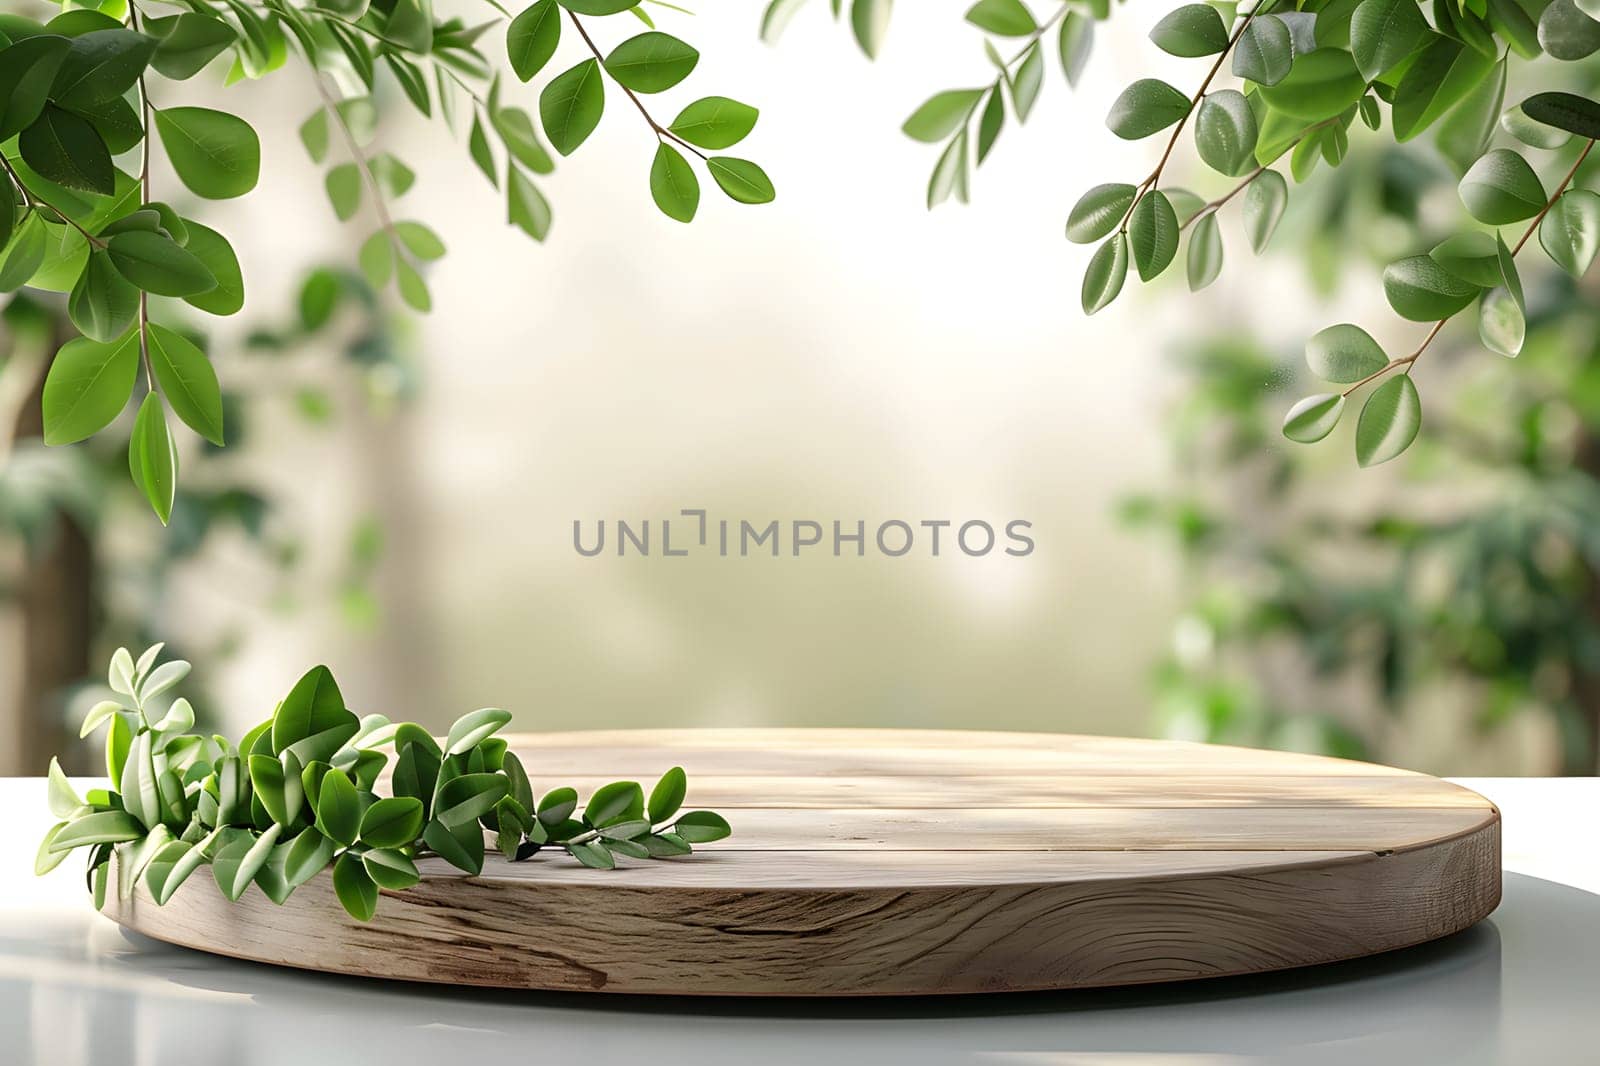 A rectangular hardwood cutting board with green leaves on top, rests on a table with a backdrop of grass and terrestrial plants in a serene landscape